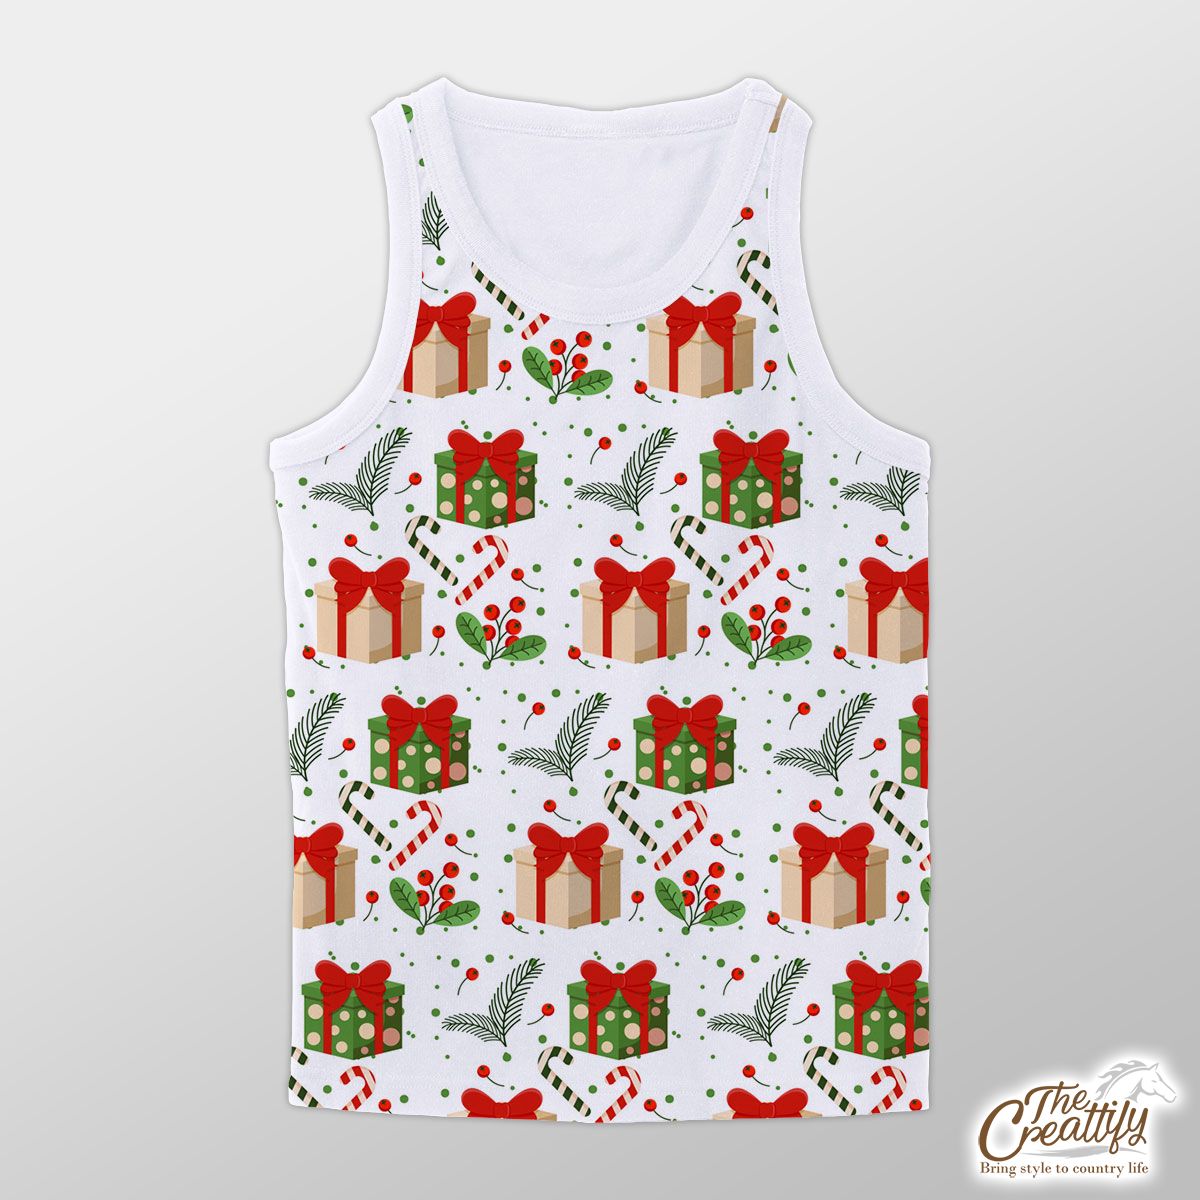 Christmas Gifts And Red Berries Unisex Tank Top